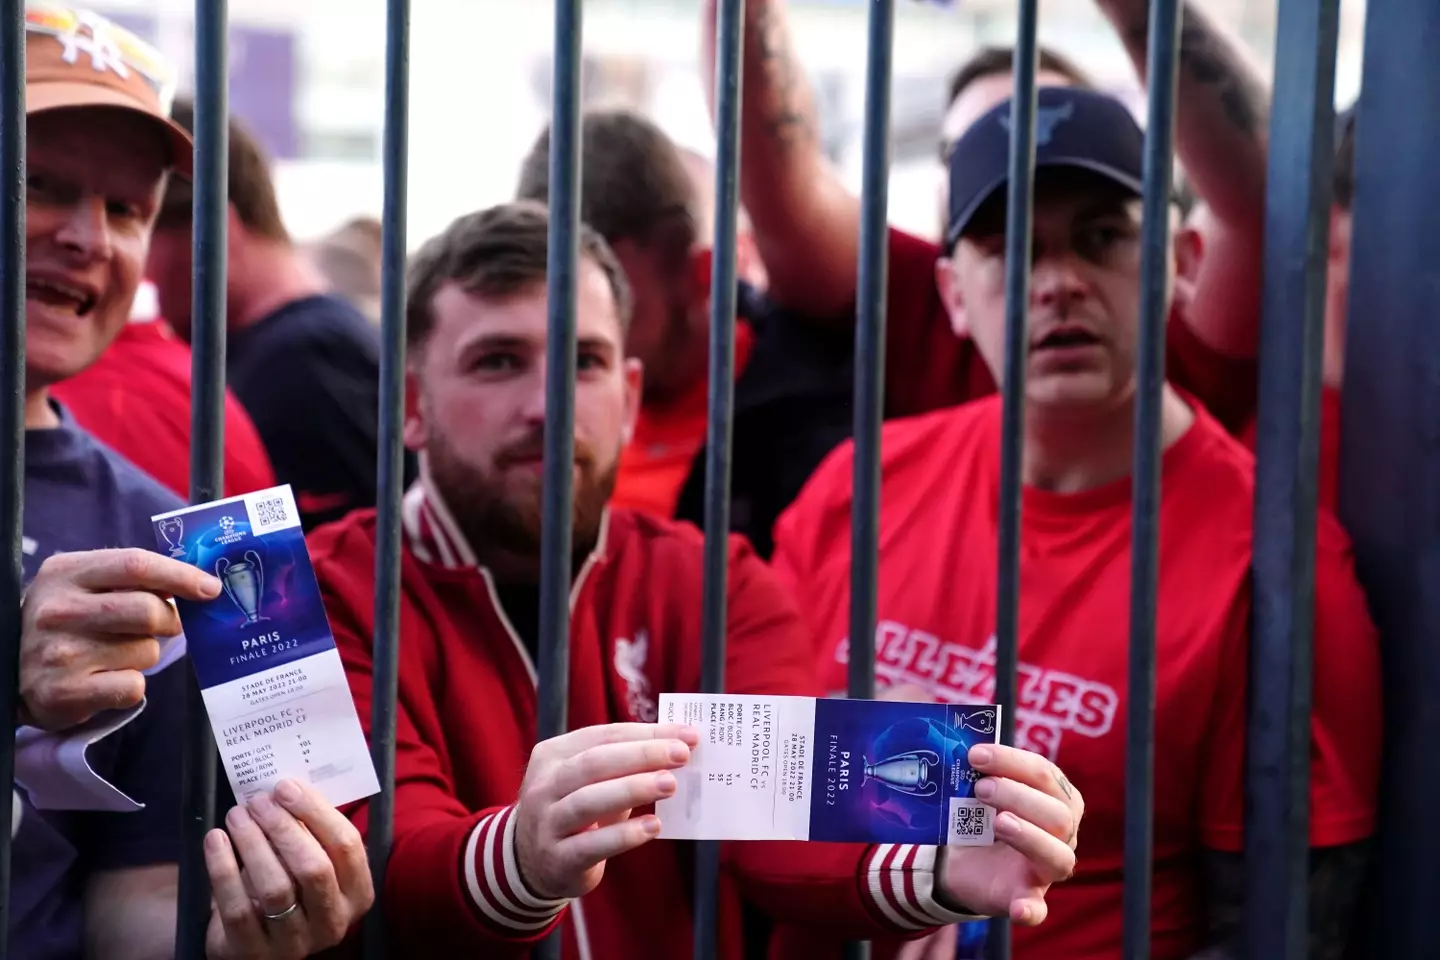 UEFA had claimed there were 40,000 fake tickets. Image: Alamy